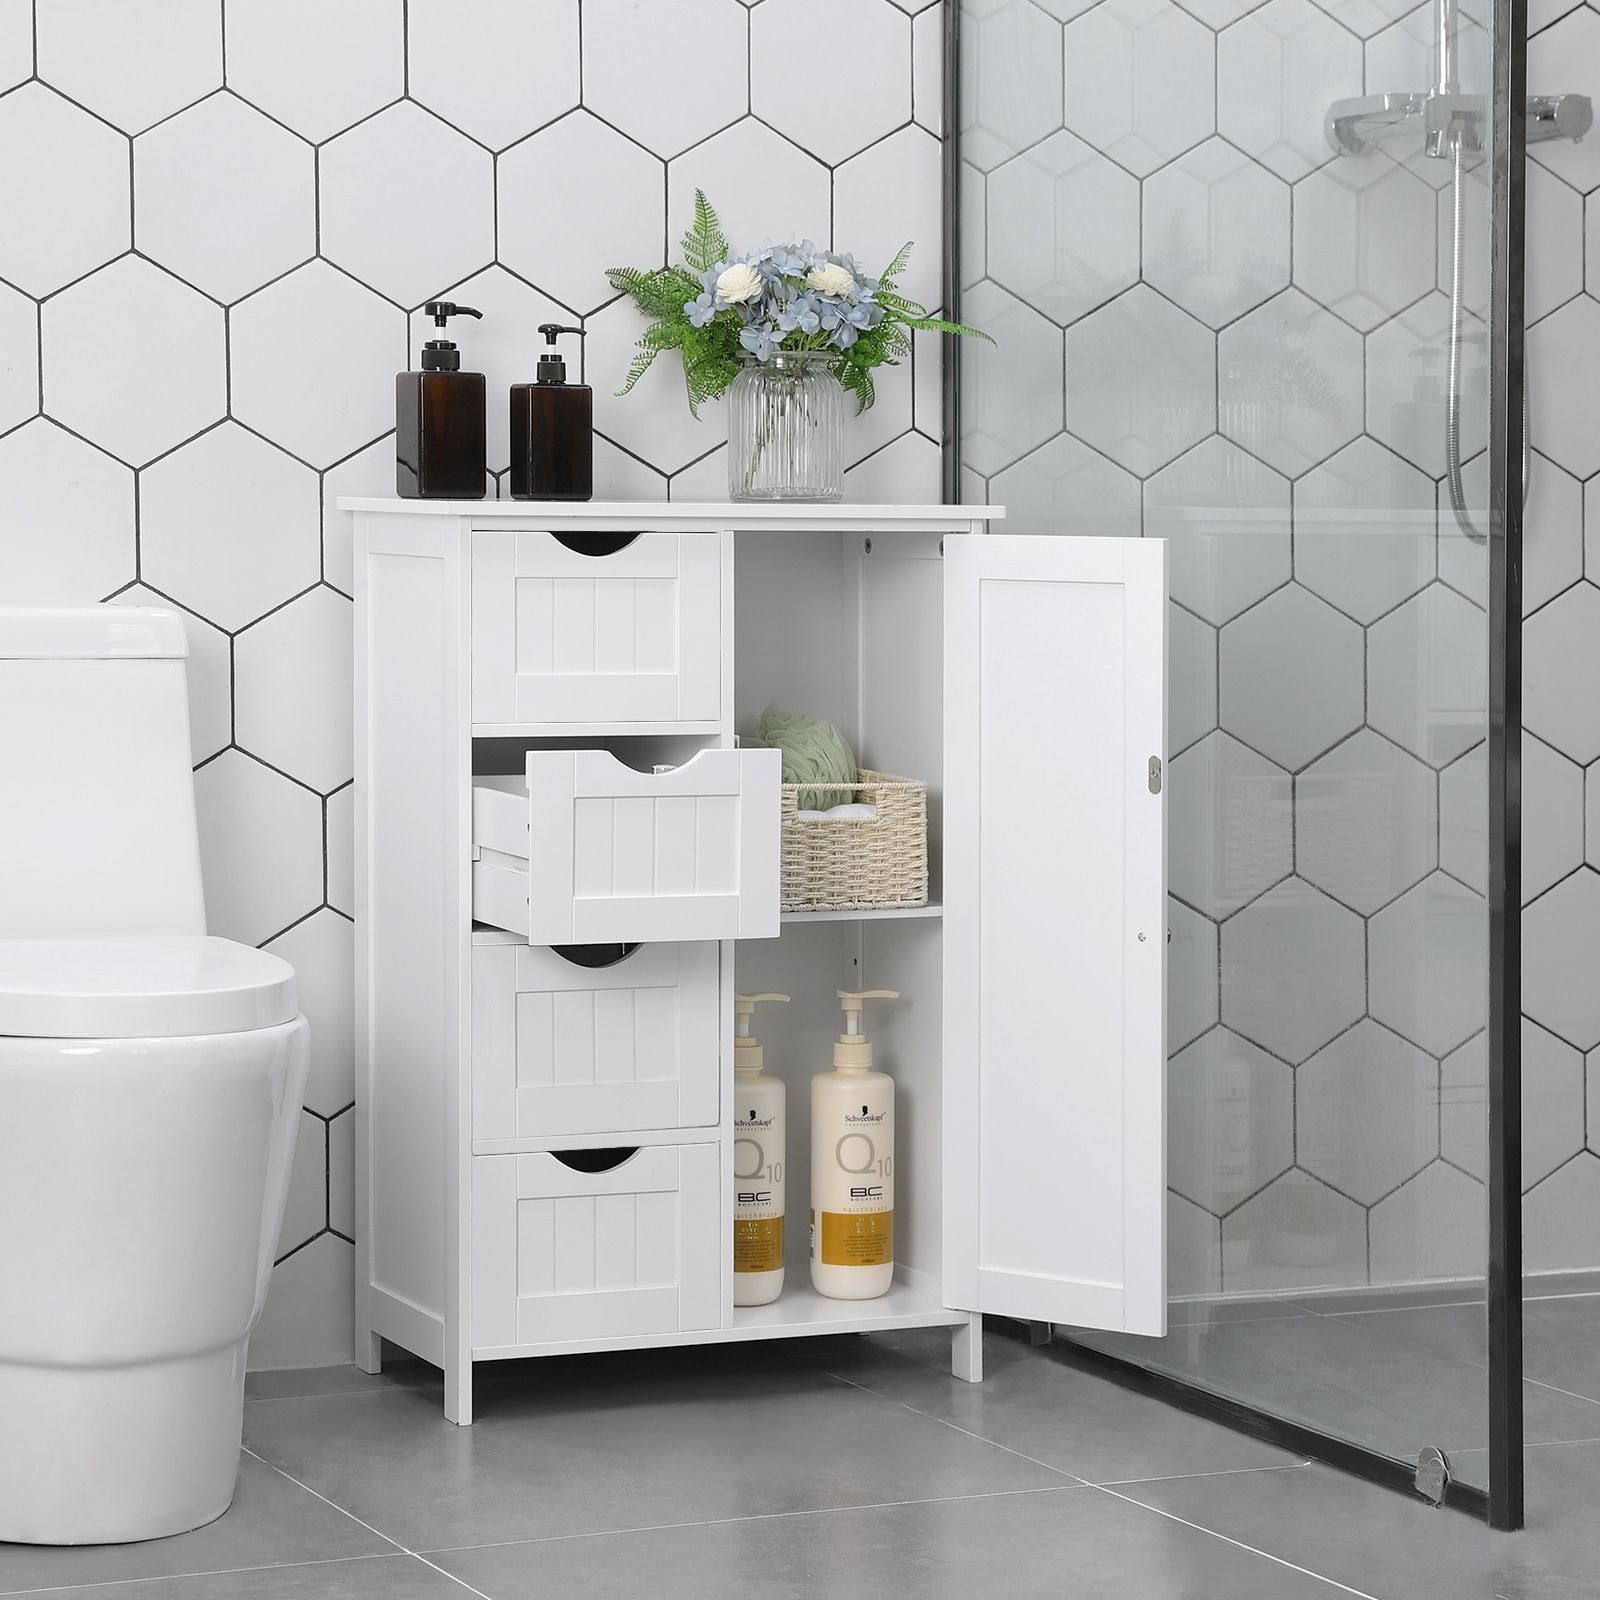 https://ak1.ostkcdn.com/images/products/is/images/direct/e451158764feae8fc7627281cac3f12dc934078b/VASAGLE-Bathroom-Storage-Cabinet%2C-Floor-with-Adjustable-Shelf-and-Drawers%2C-White.jpg